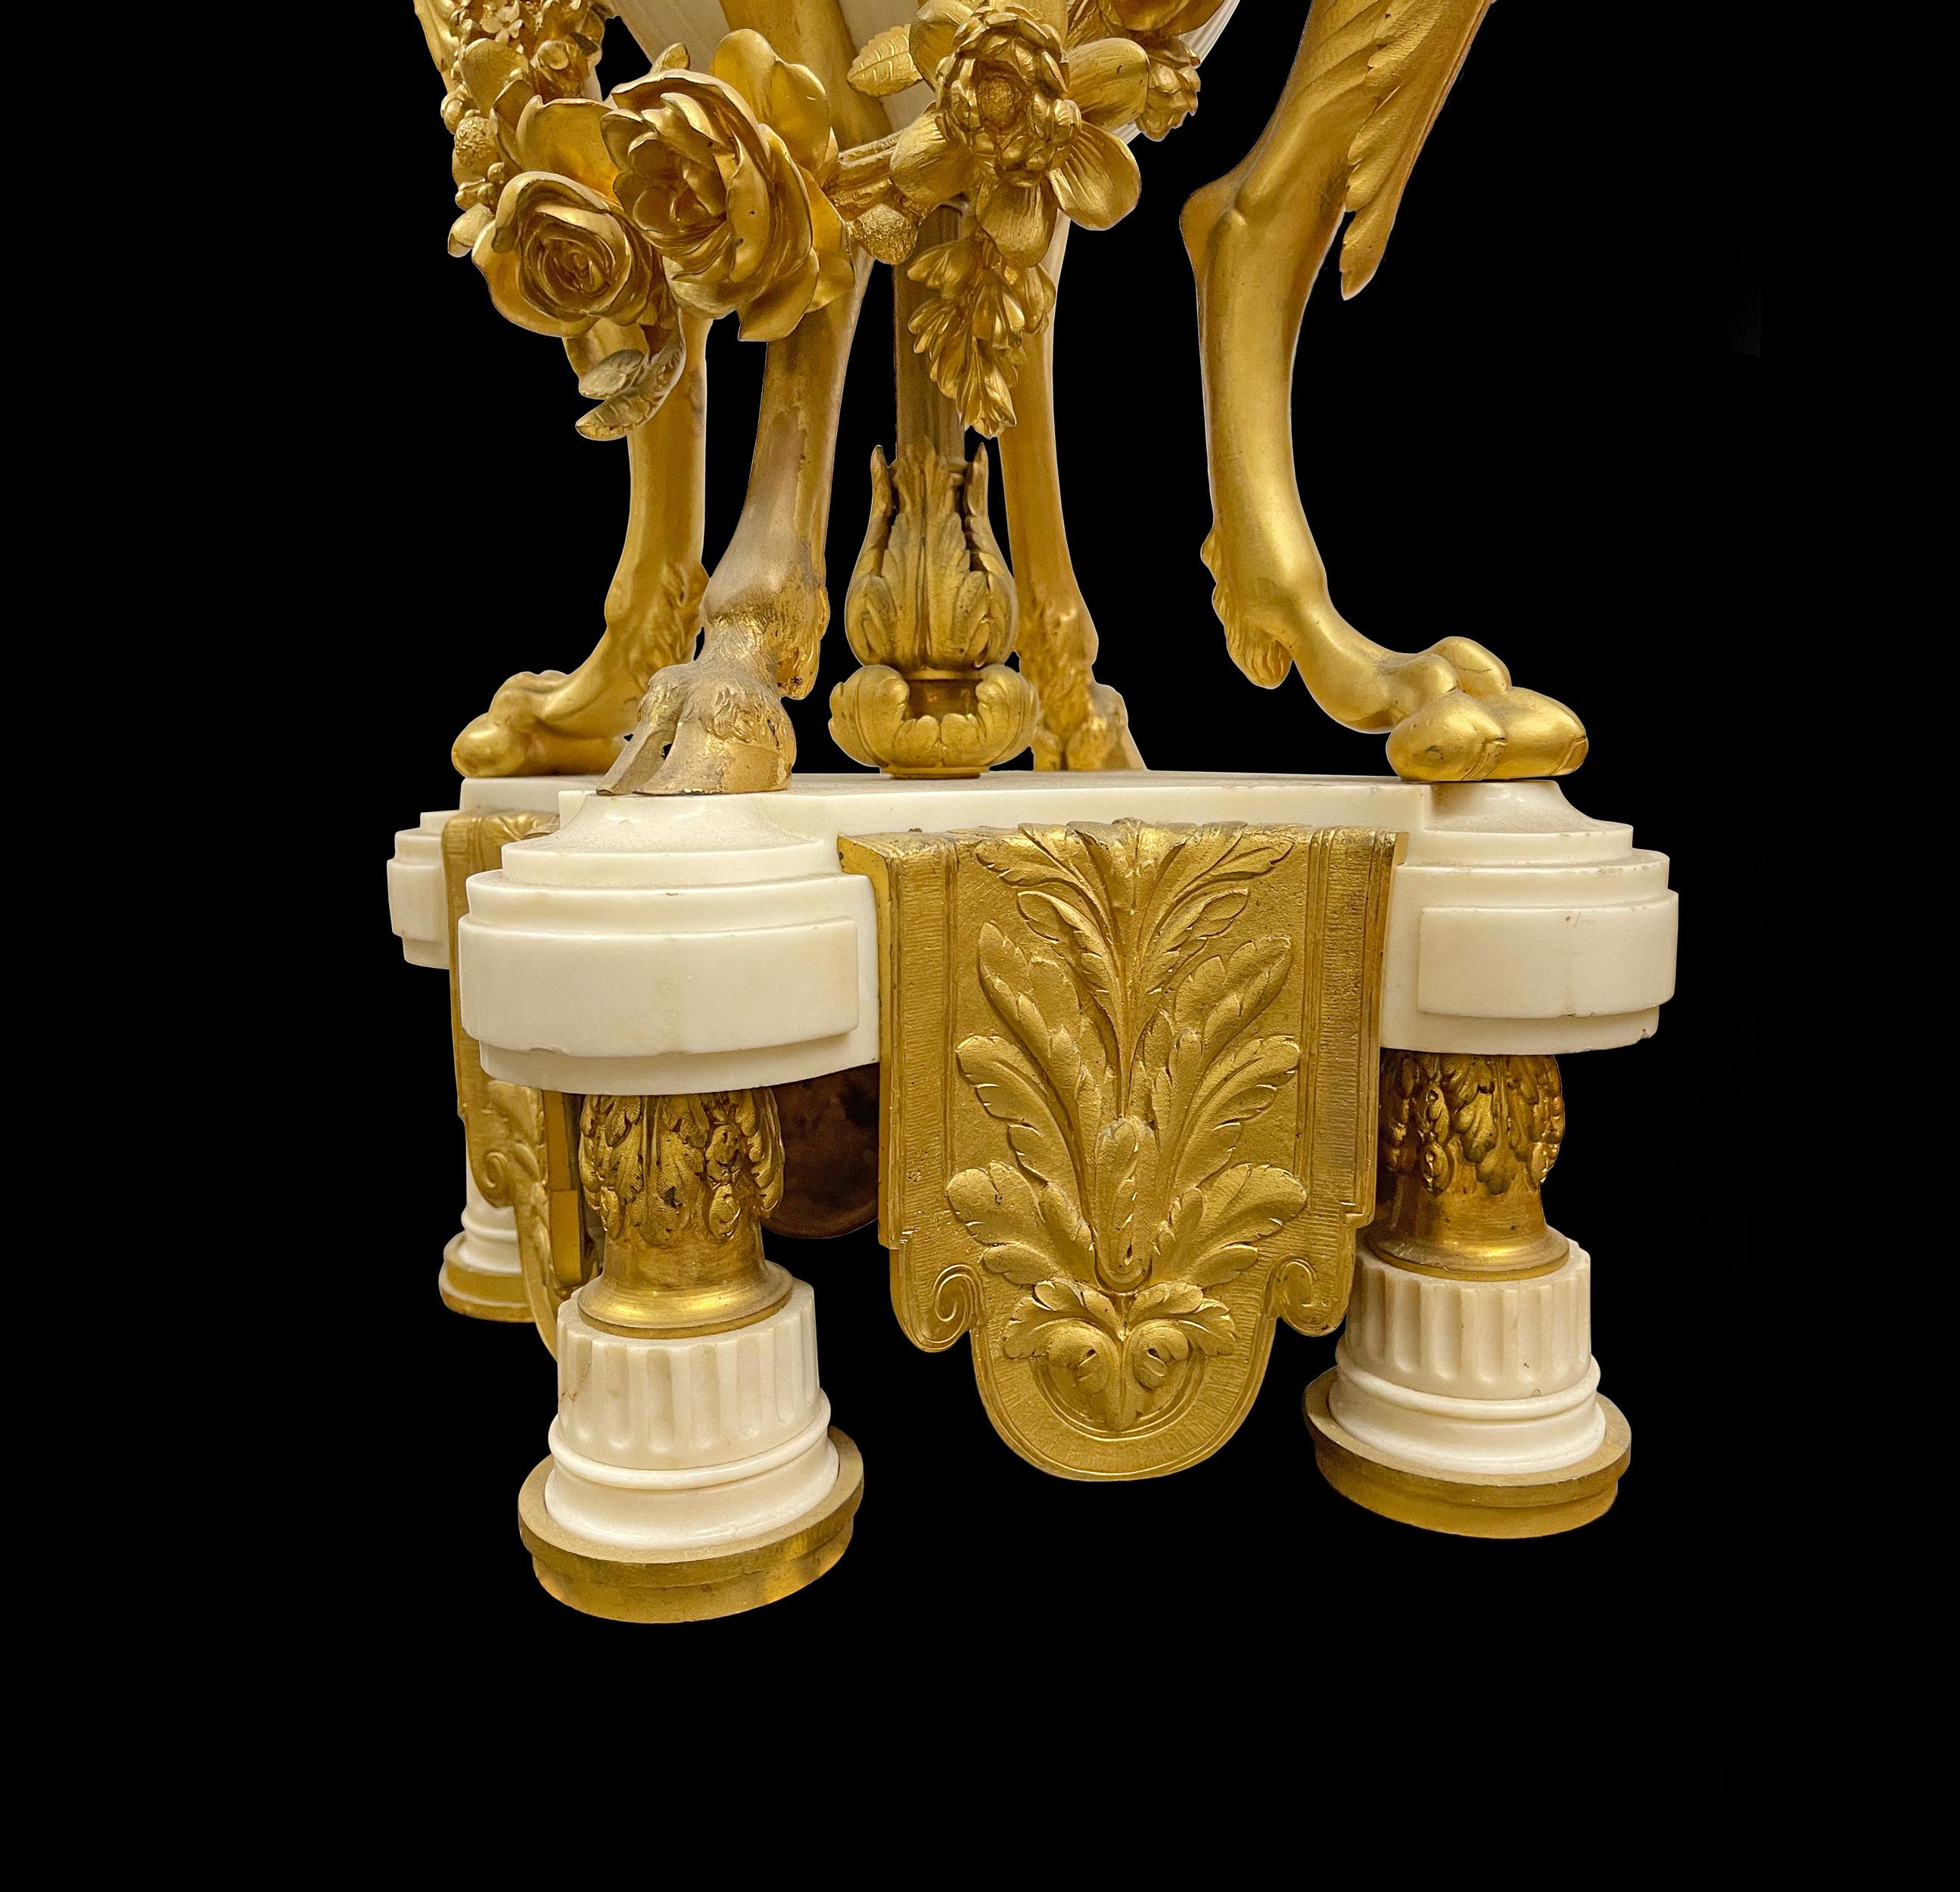 Pair of French Ormolu & White Marble Candelabras, by Marchand a Paris In Good Condition For Sale In Pasadena, CA